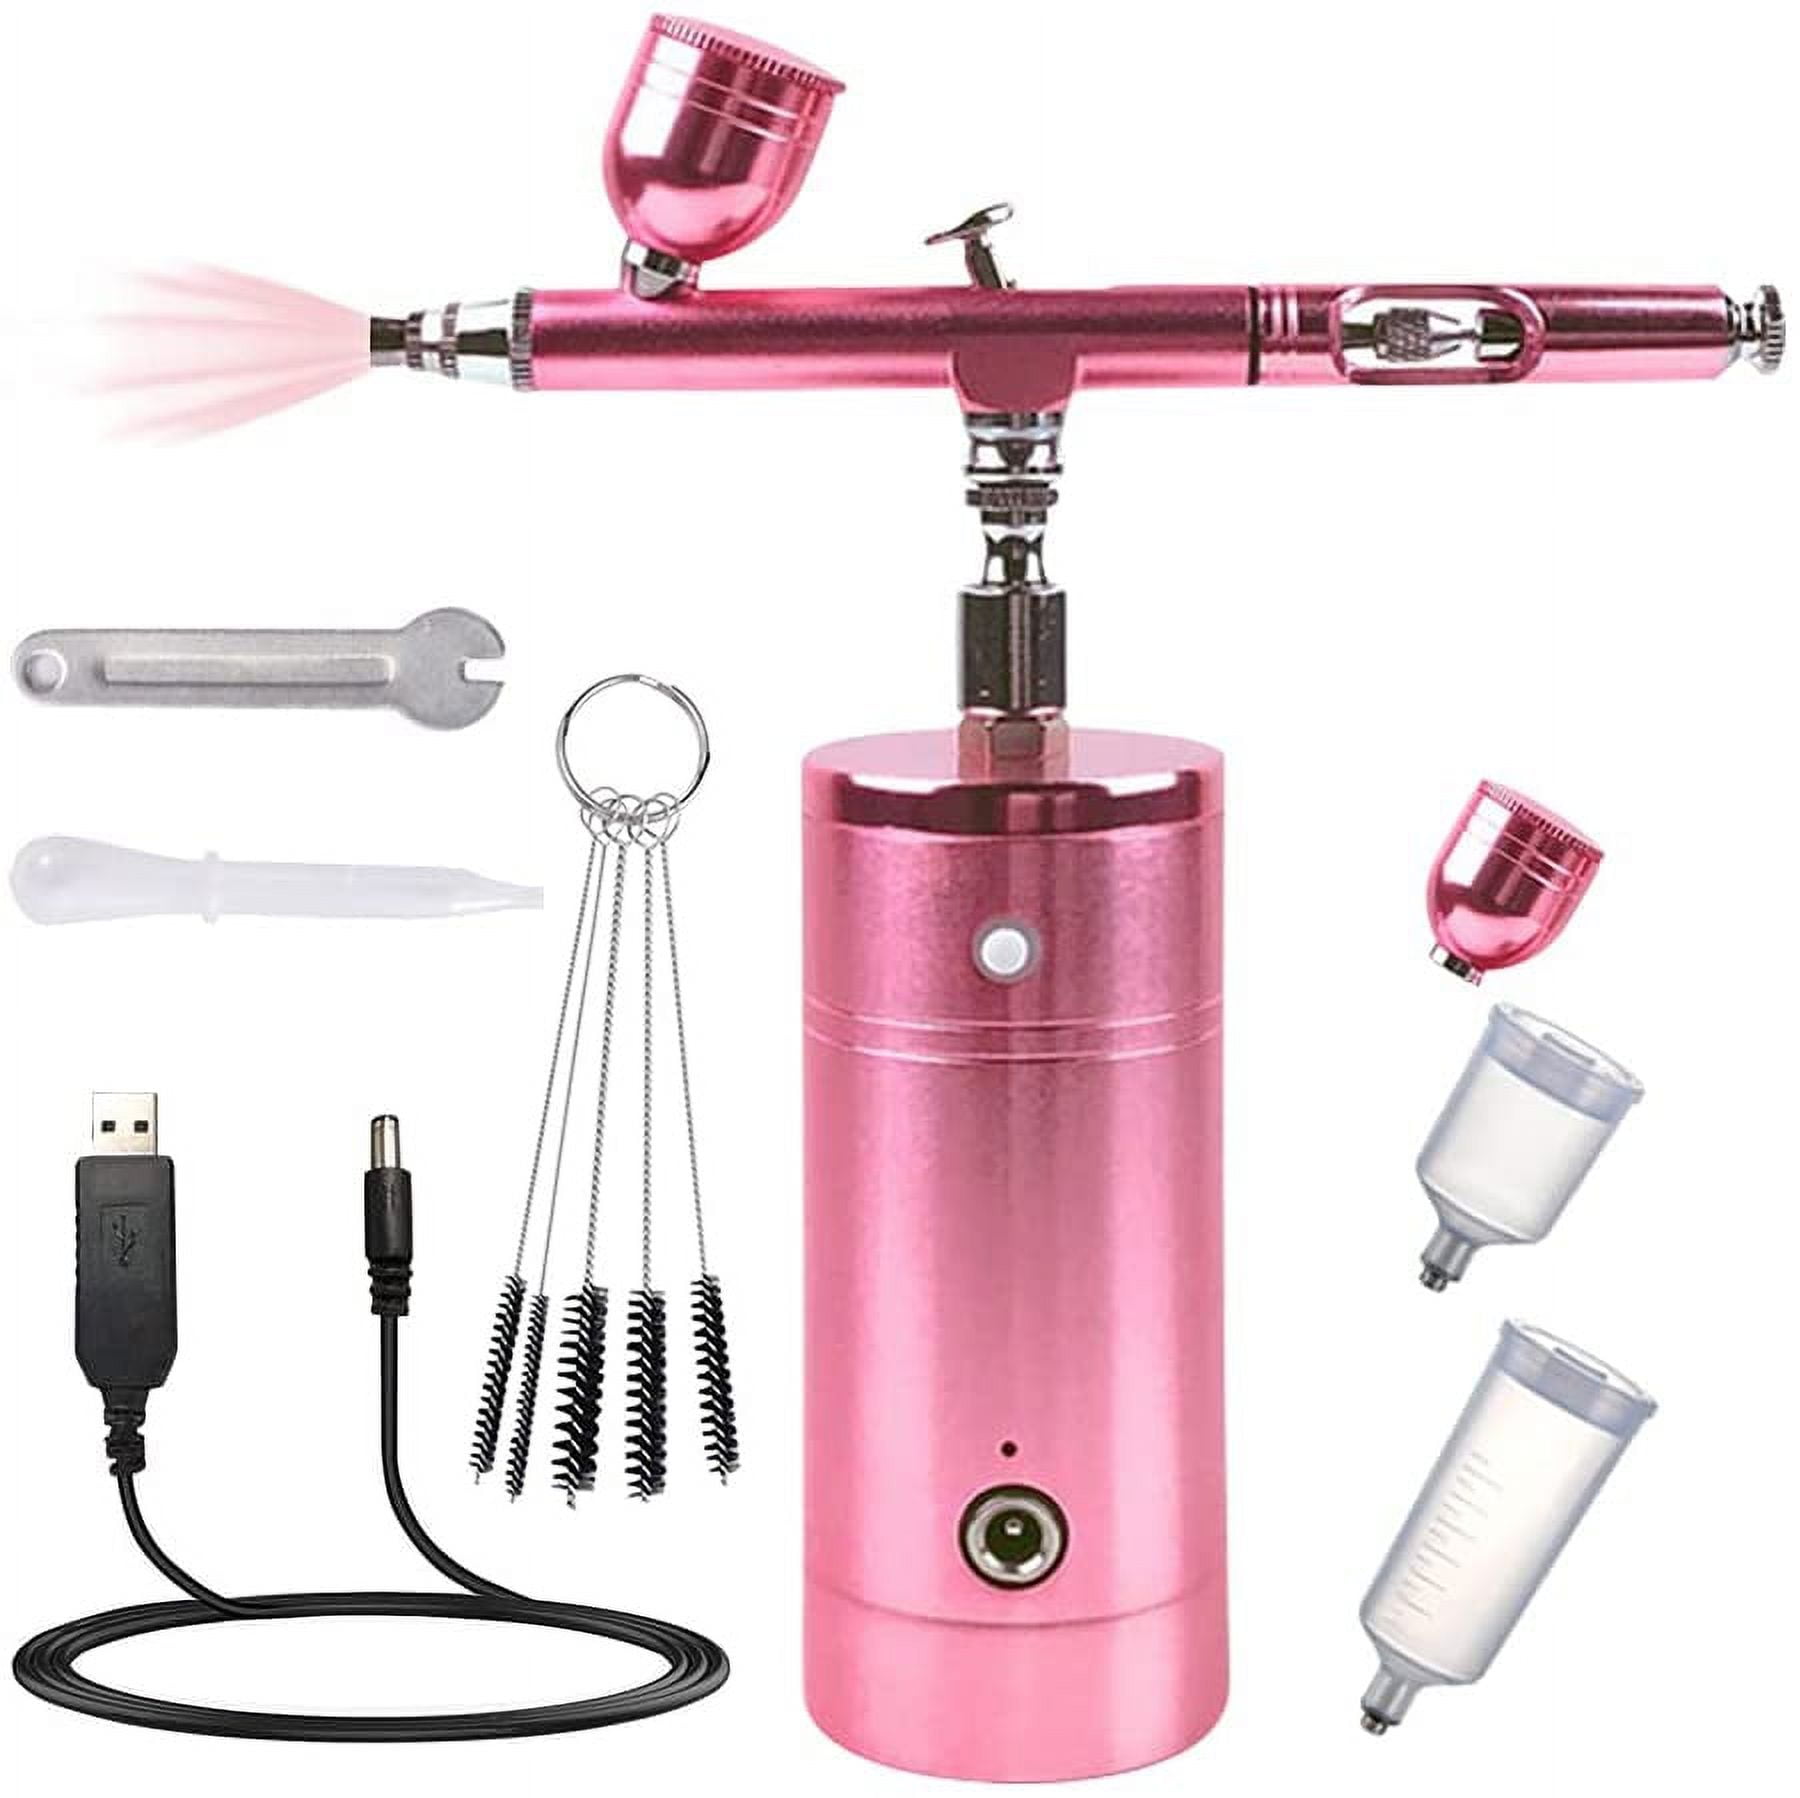 RIBO Portable Airbrush With Compressor Kit Quiet Mini Hot Brush Dryer Top  Gun For Art, Cake, Nail Model Painting, Tattoo Manicure 221007 From Kong08,  $58.69